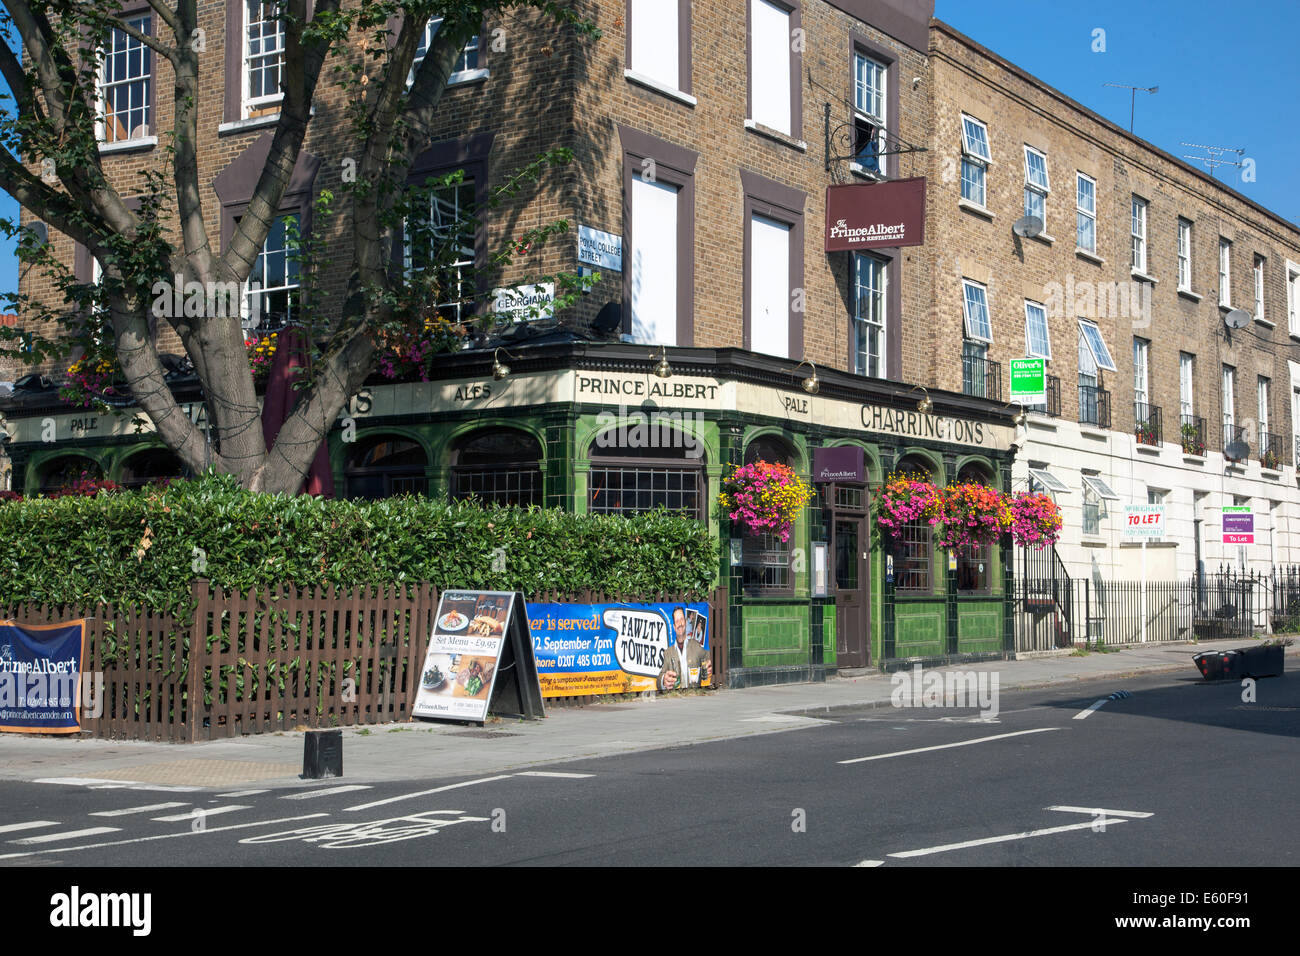 Royal College Street, Camden, United Kingdom - Prince Albert - a traditional pub in the area Stock Photo